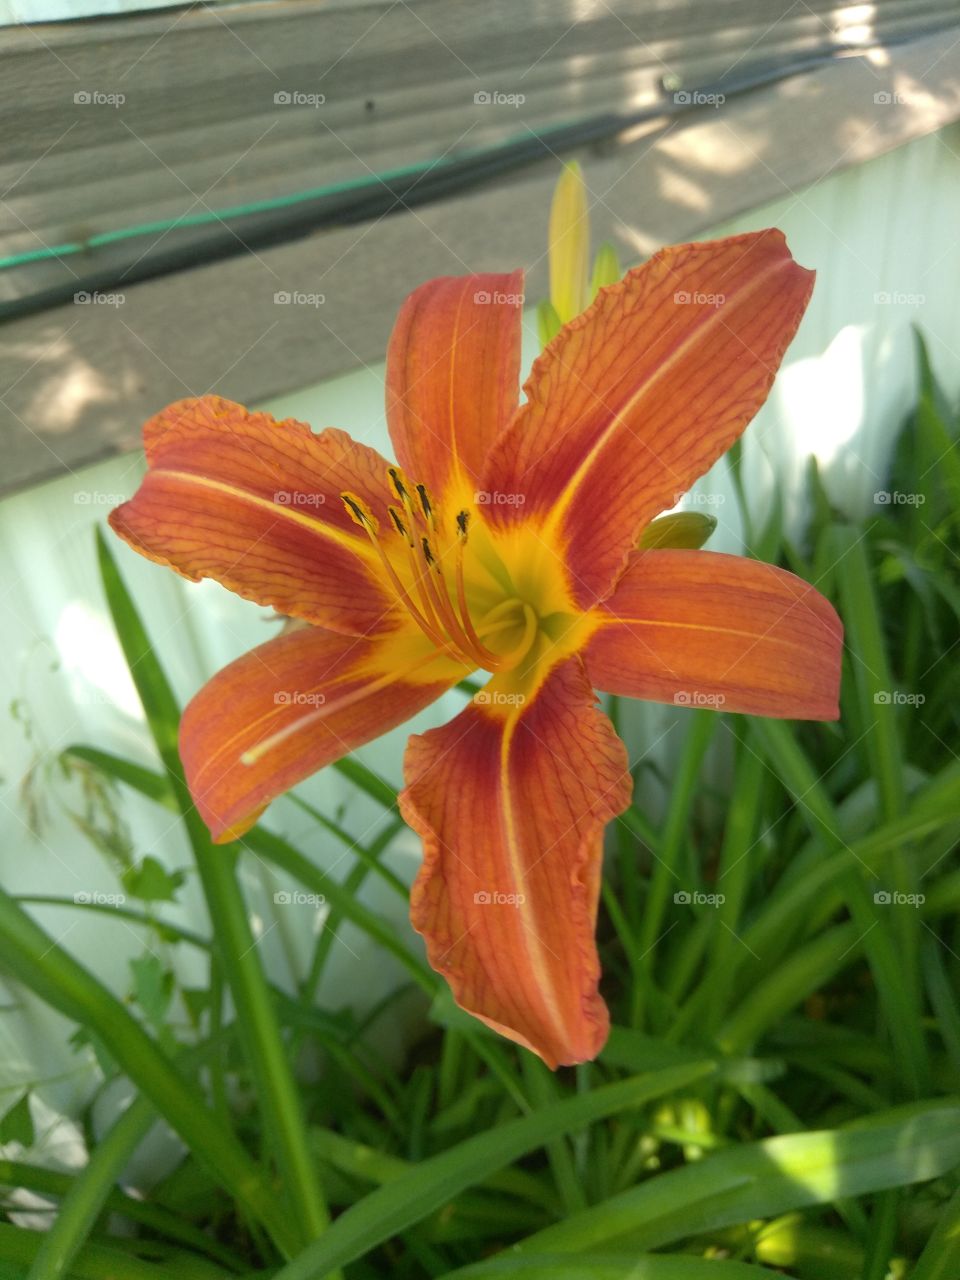 beautiful flower that I caught in back of house